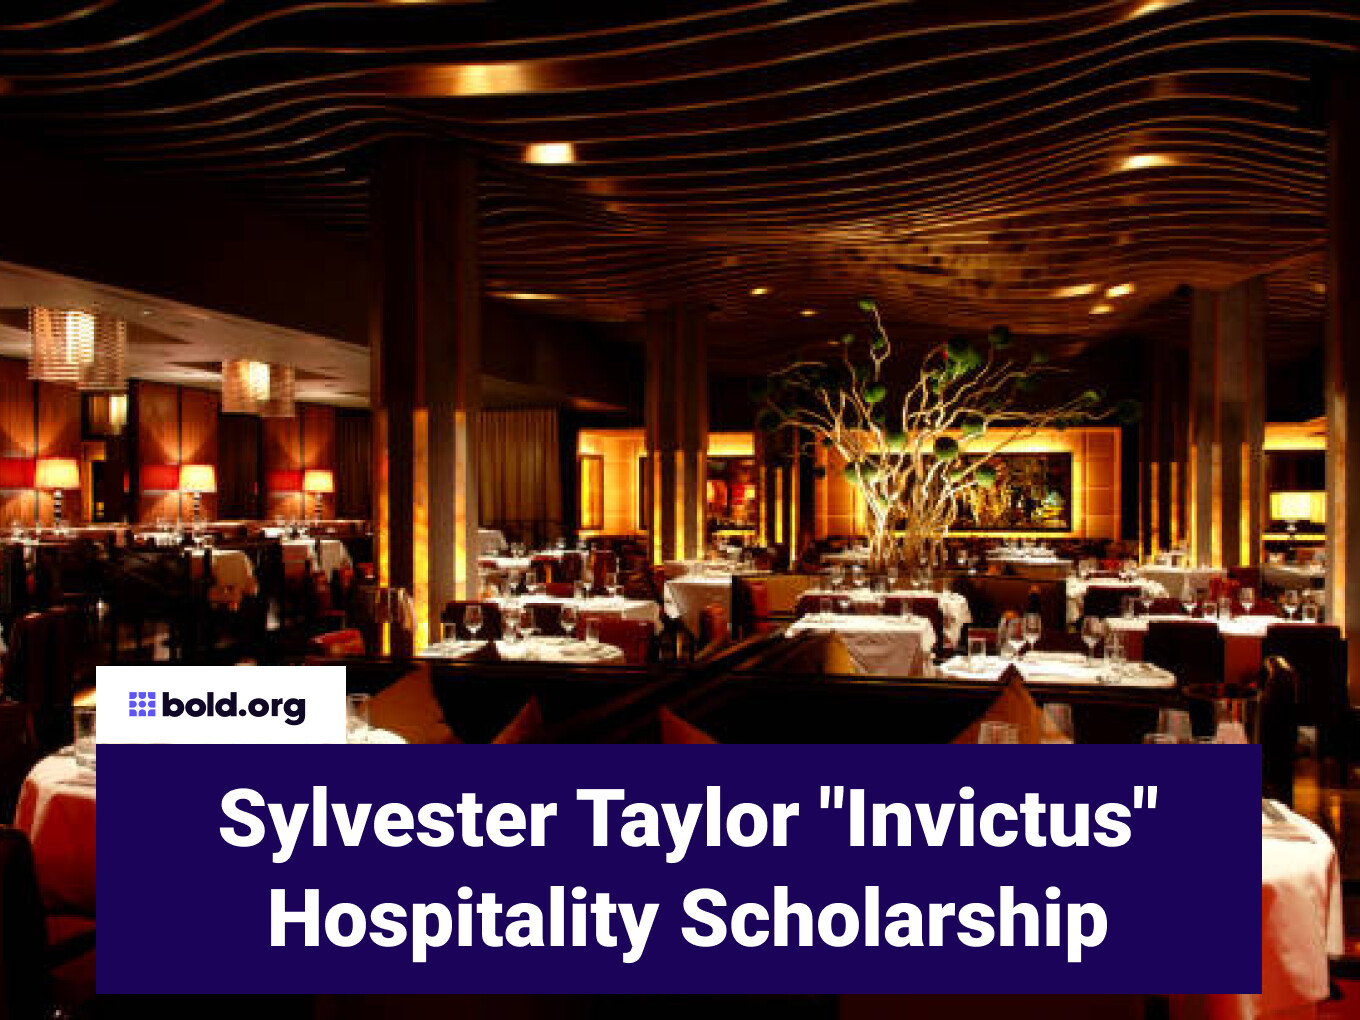 The Sylvester Taylor "Invictus" Hospitality Scholarship